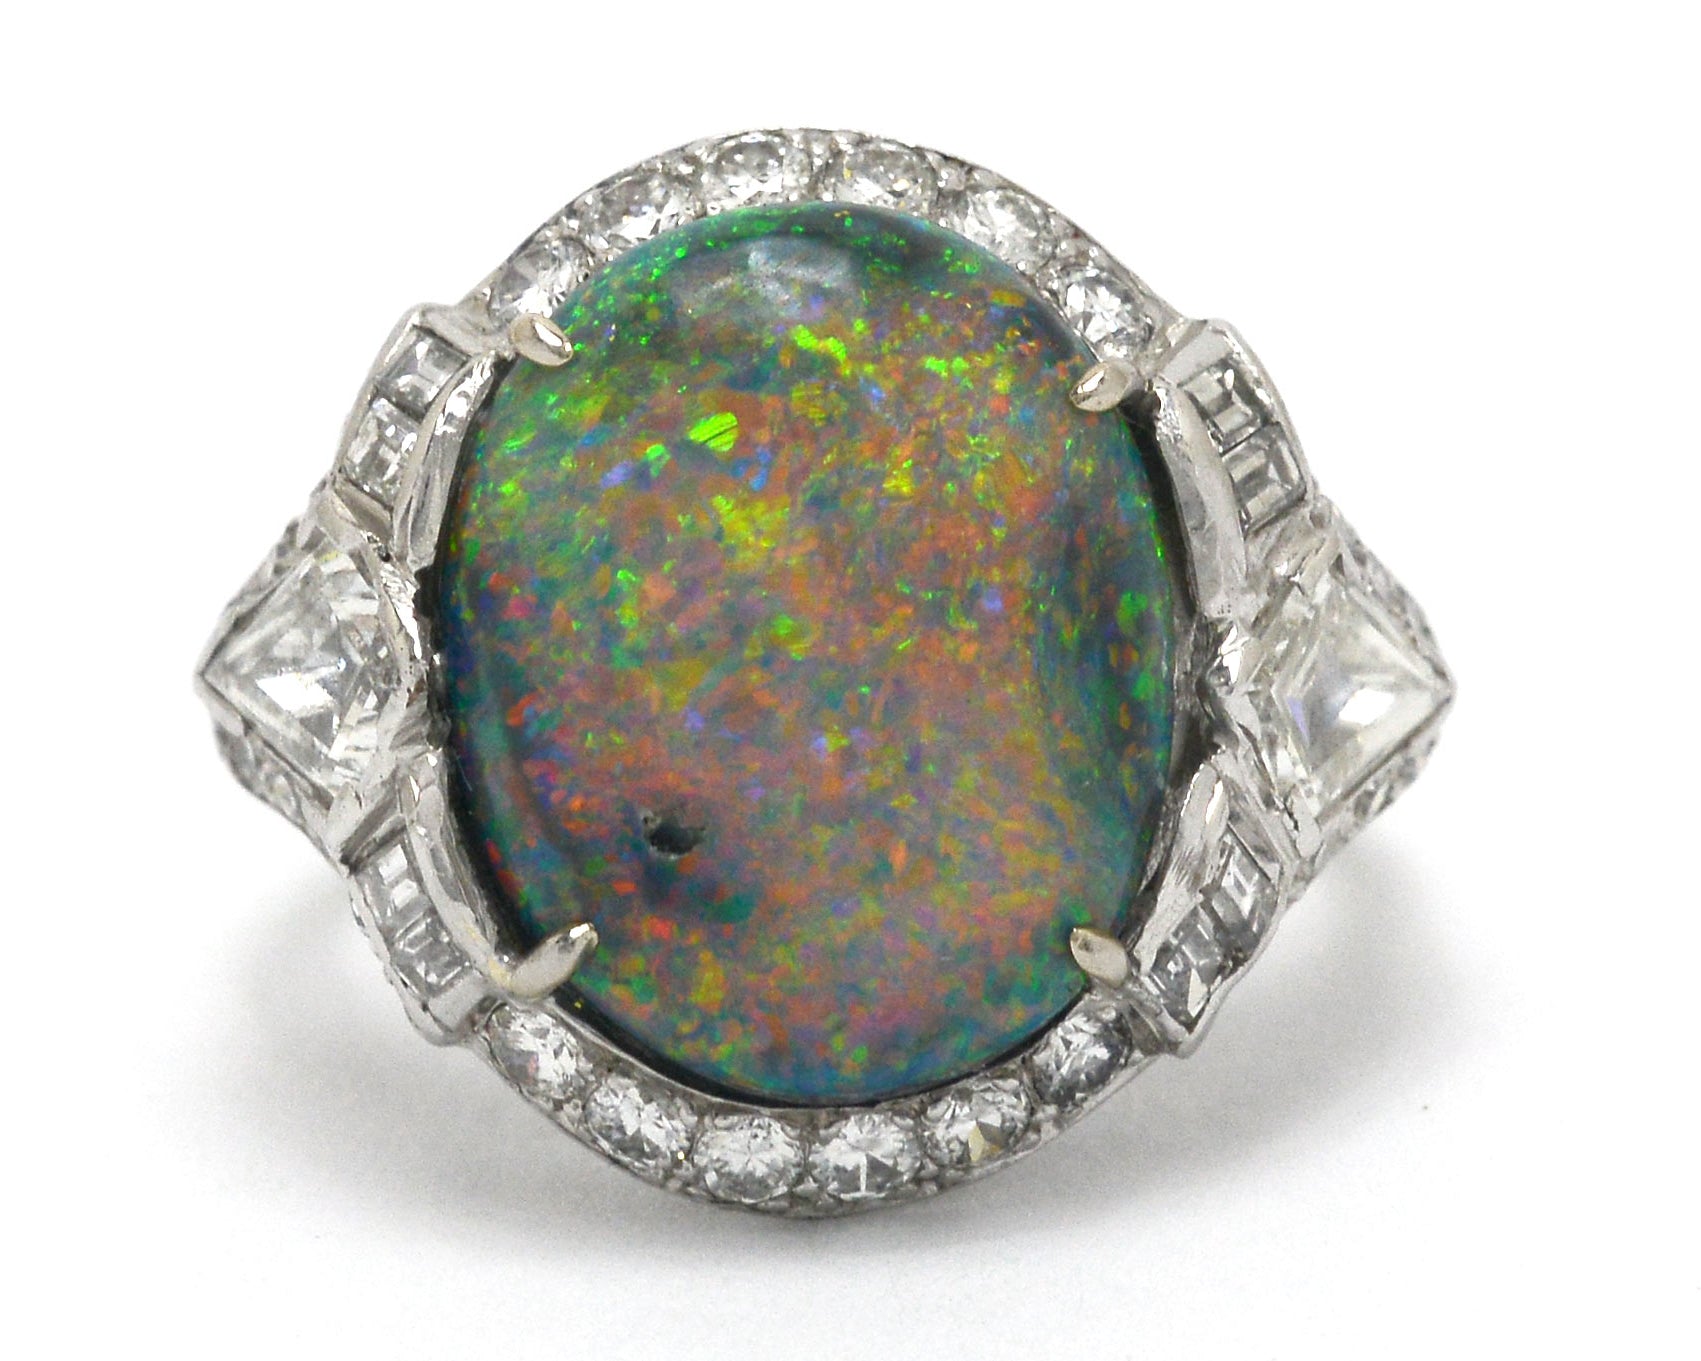 A large black opal set in a diamond halo, Art Deco dome ring.